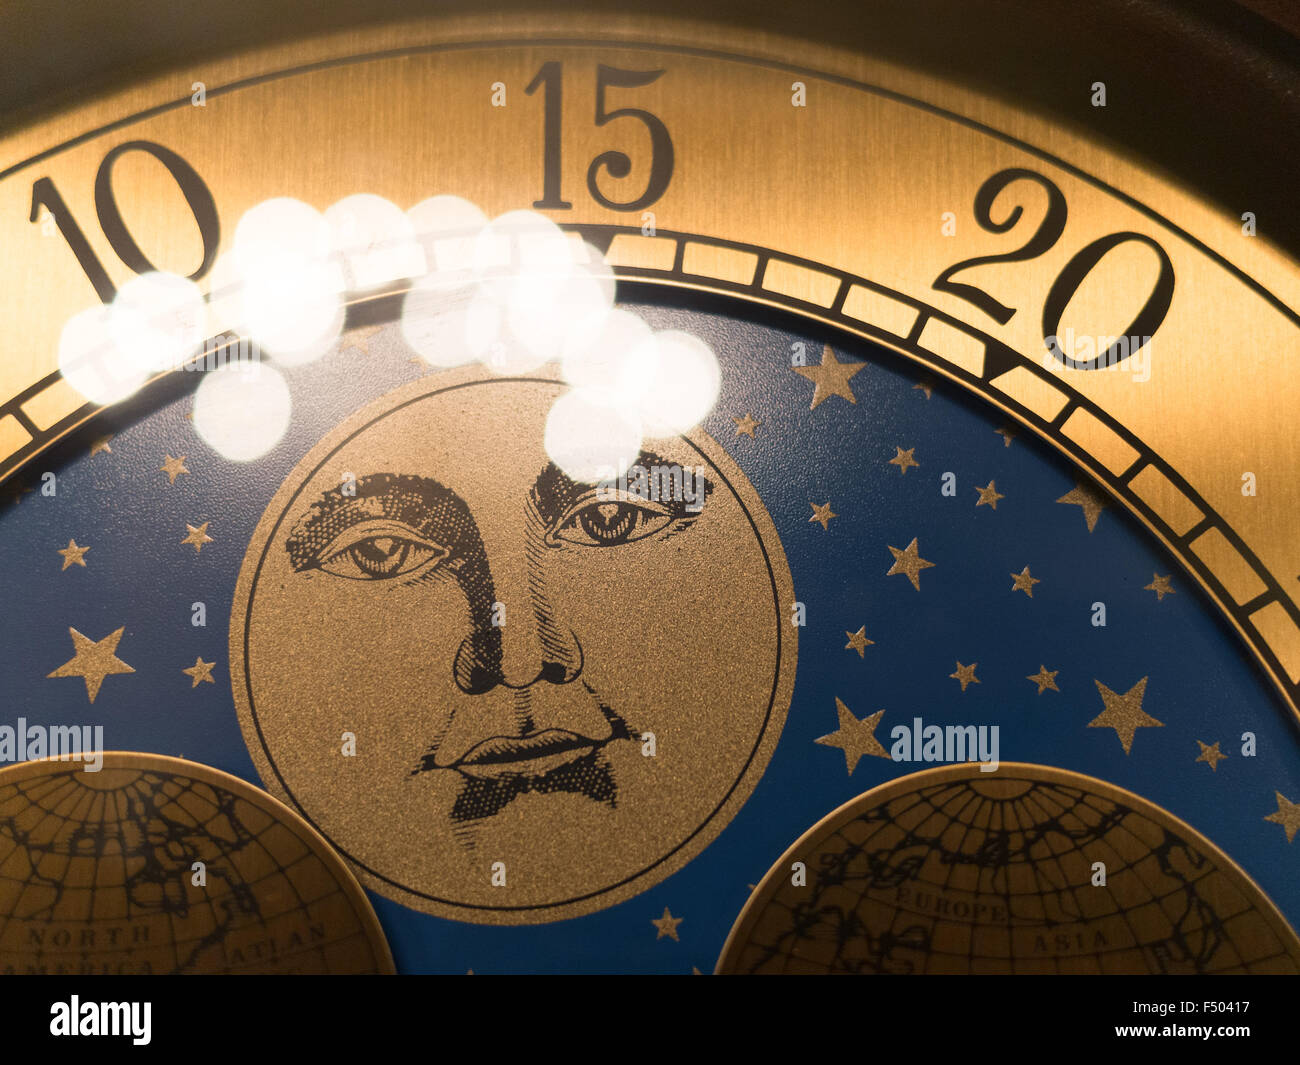 Man on the moon on an old grandfather clock Stock Photo